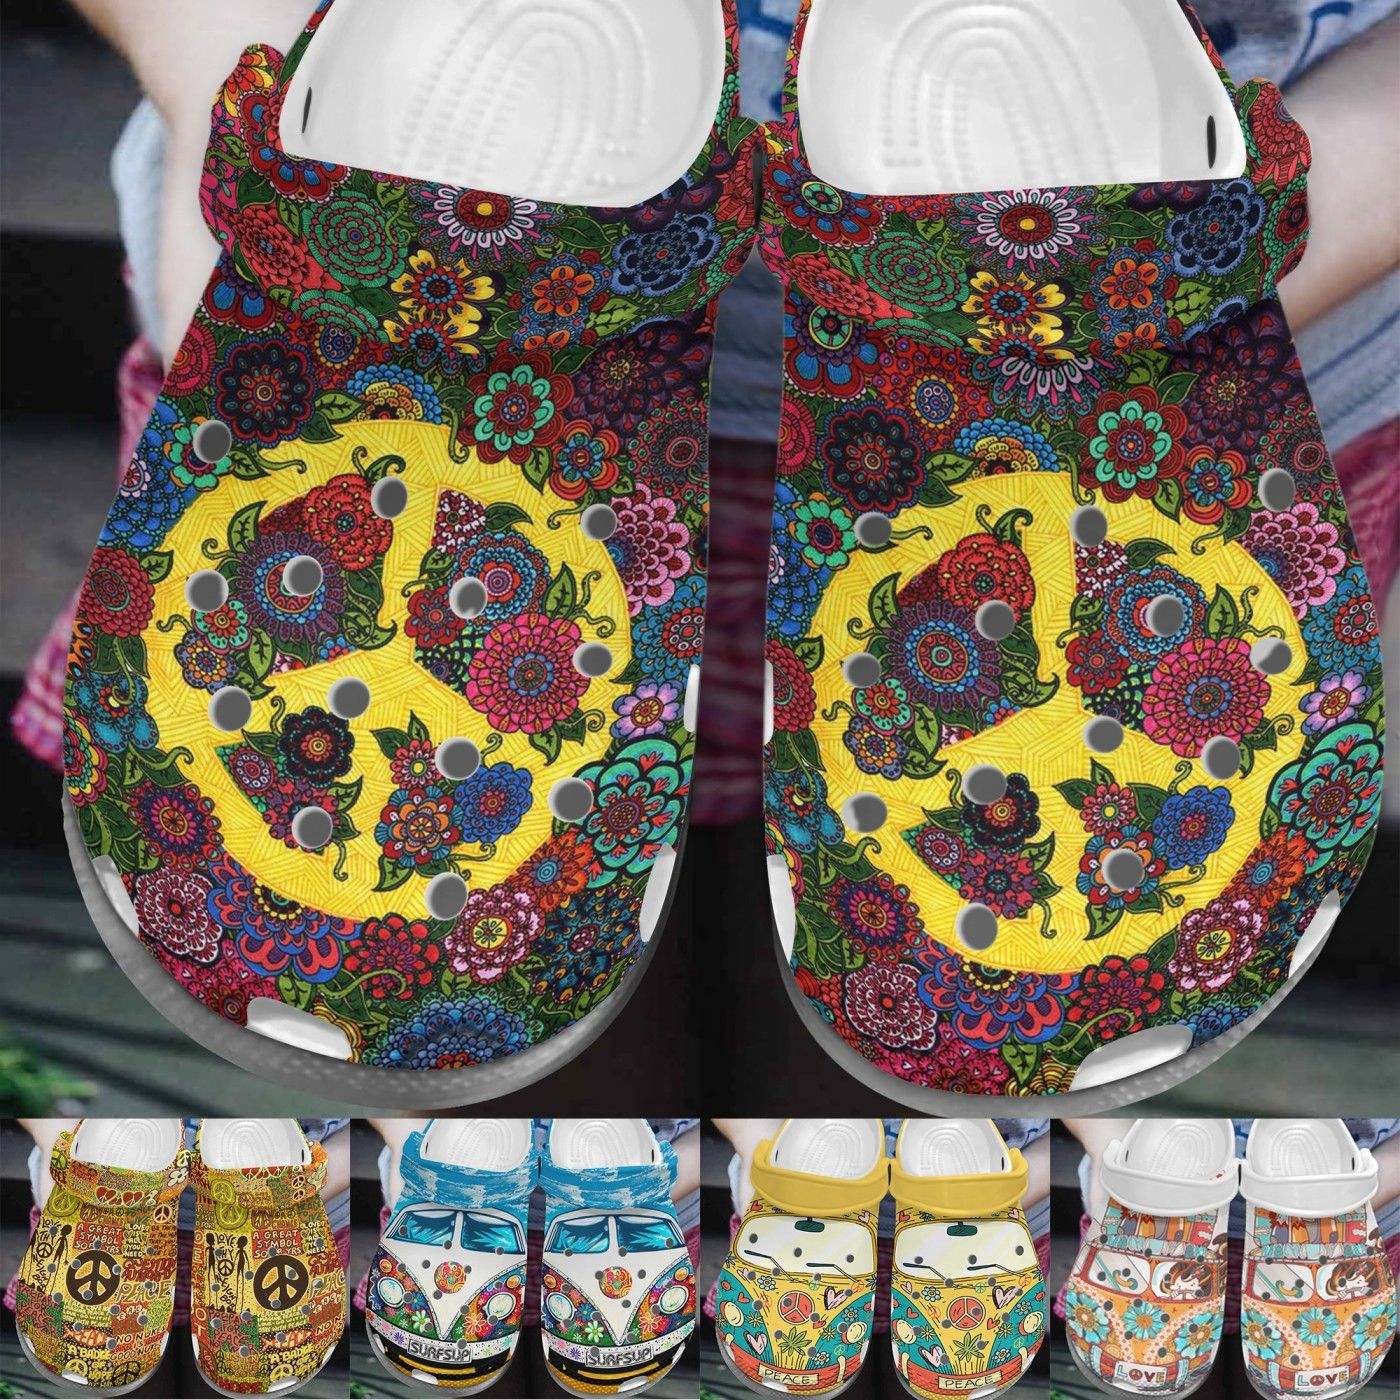 The Peace Sign Shoes Crocss – Funny Bus Camping Baseball Shoes Crocbland Clog For Daughter Son